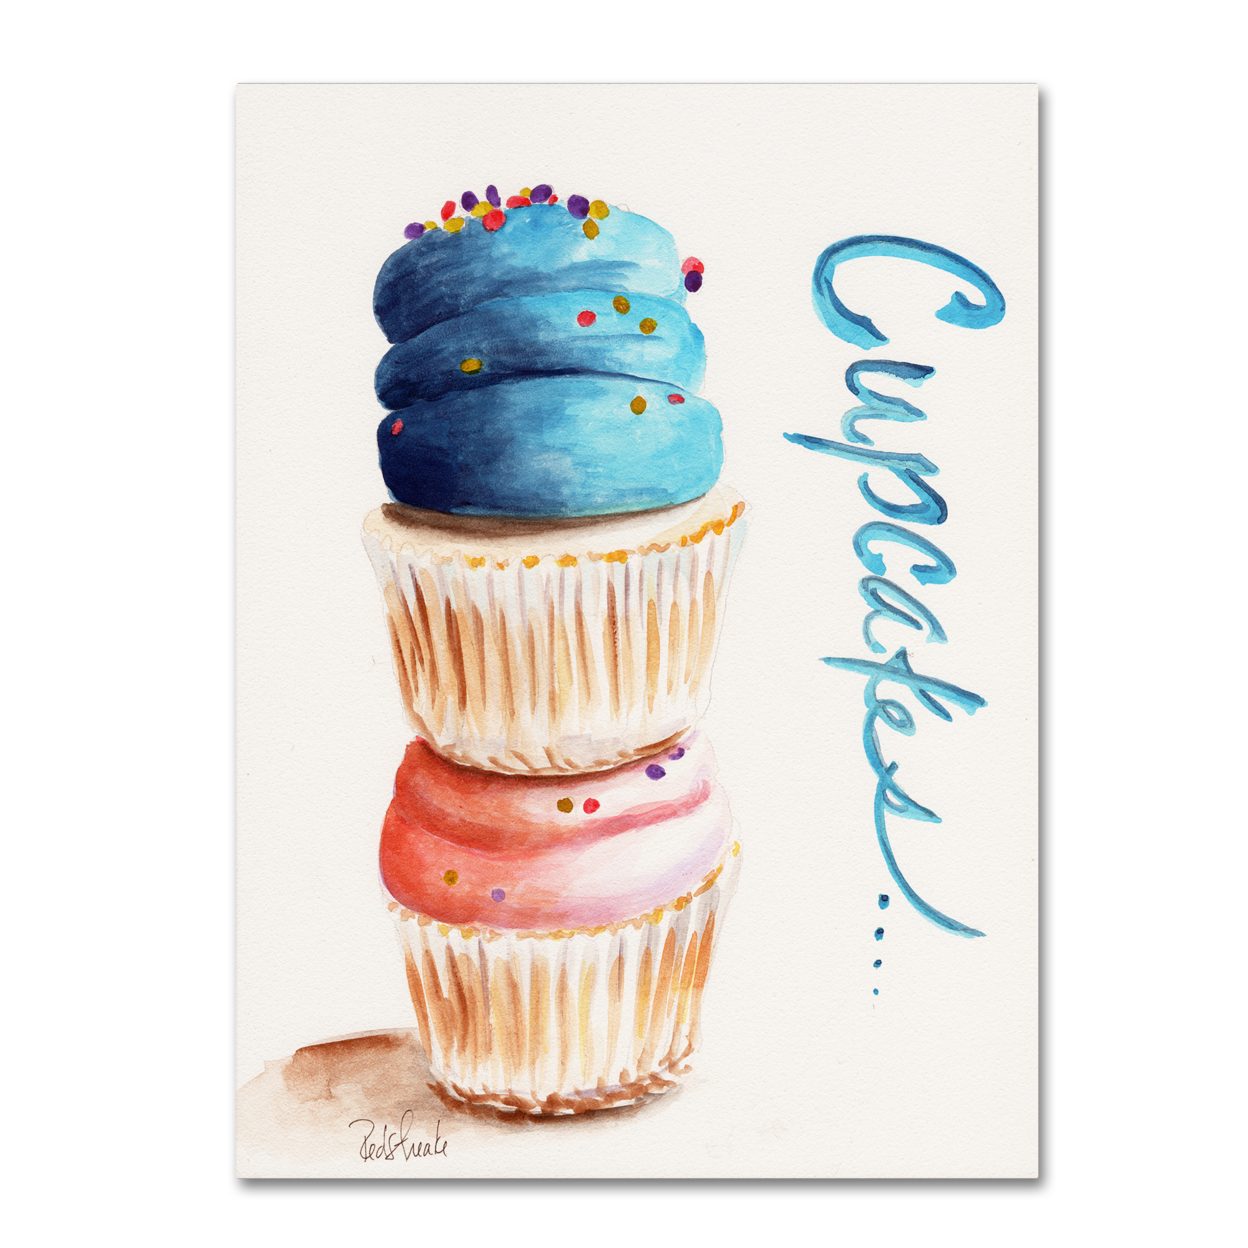 Jennifer Redstreake 'Stacked Cupcakes With Words' Canvas Art 18 X 24